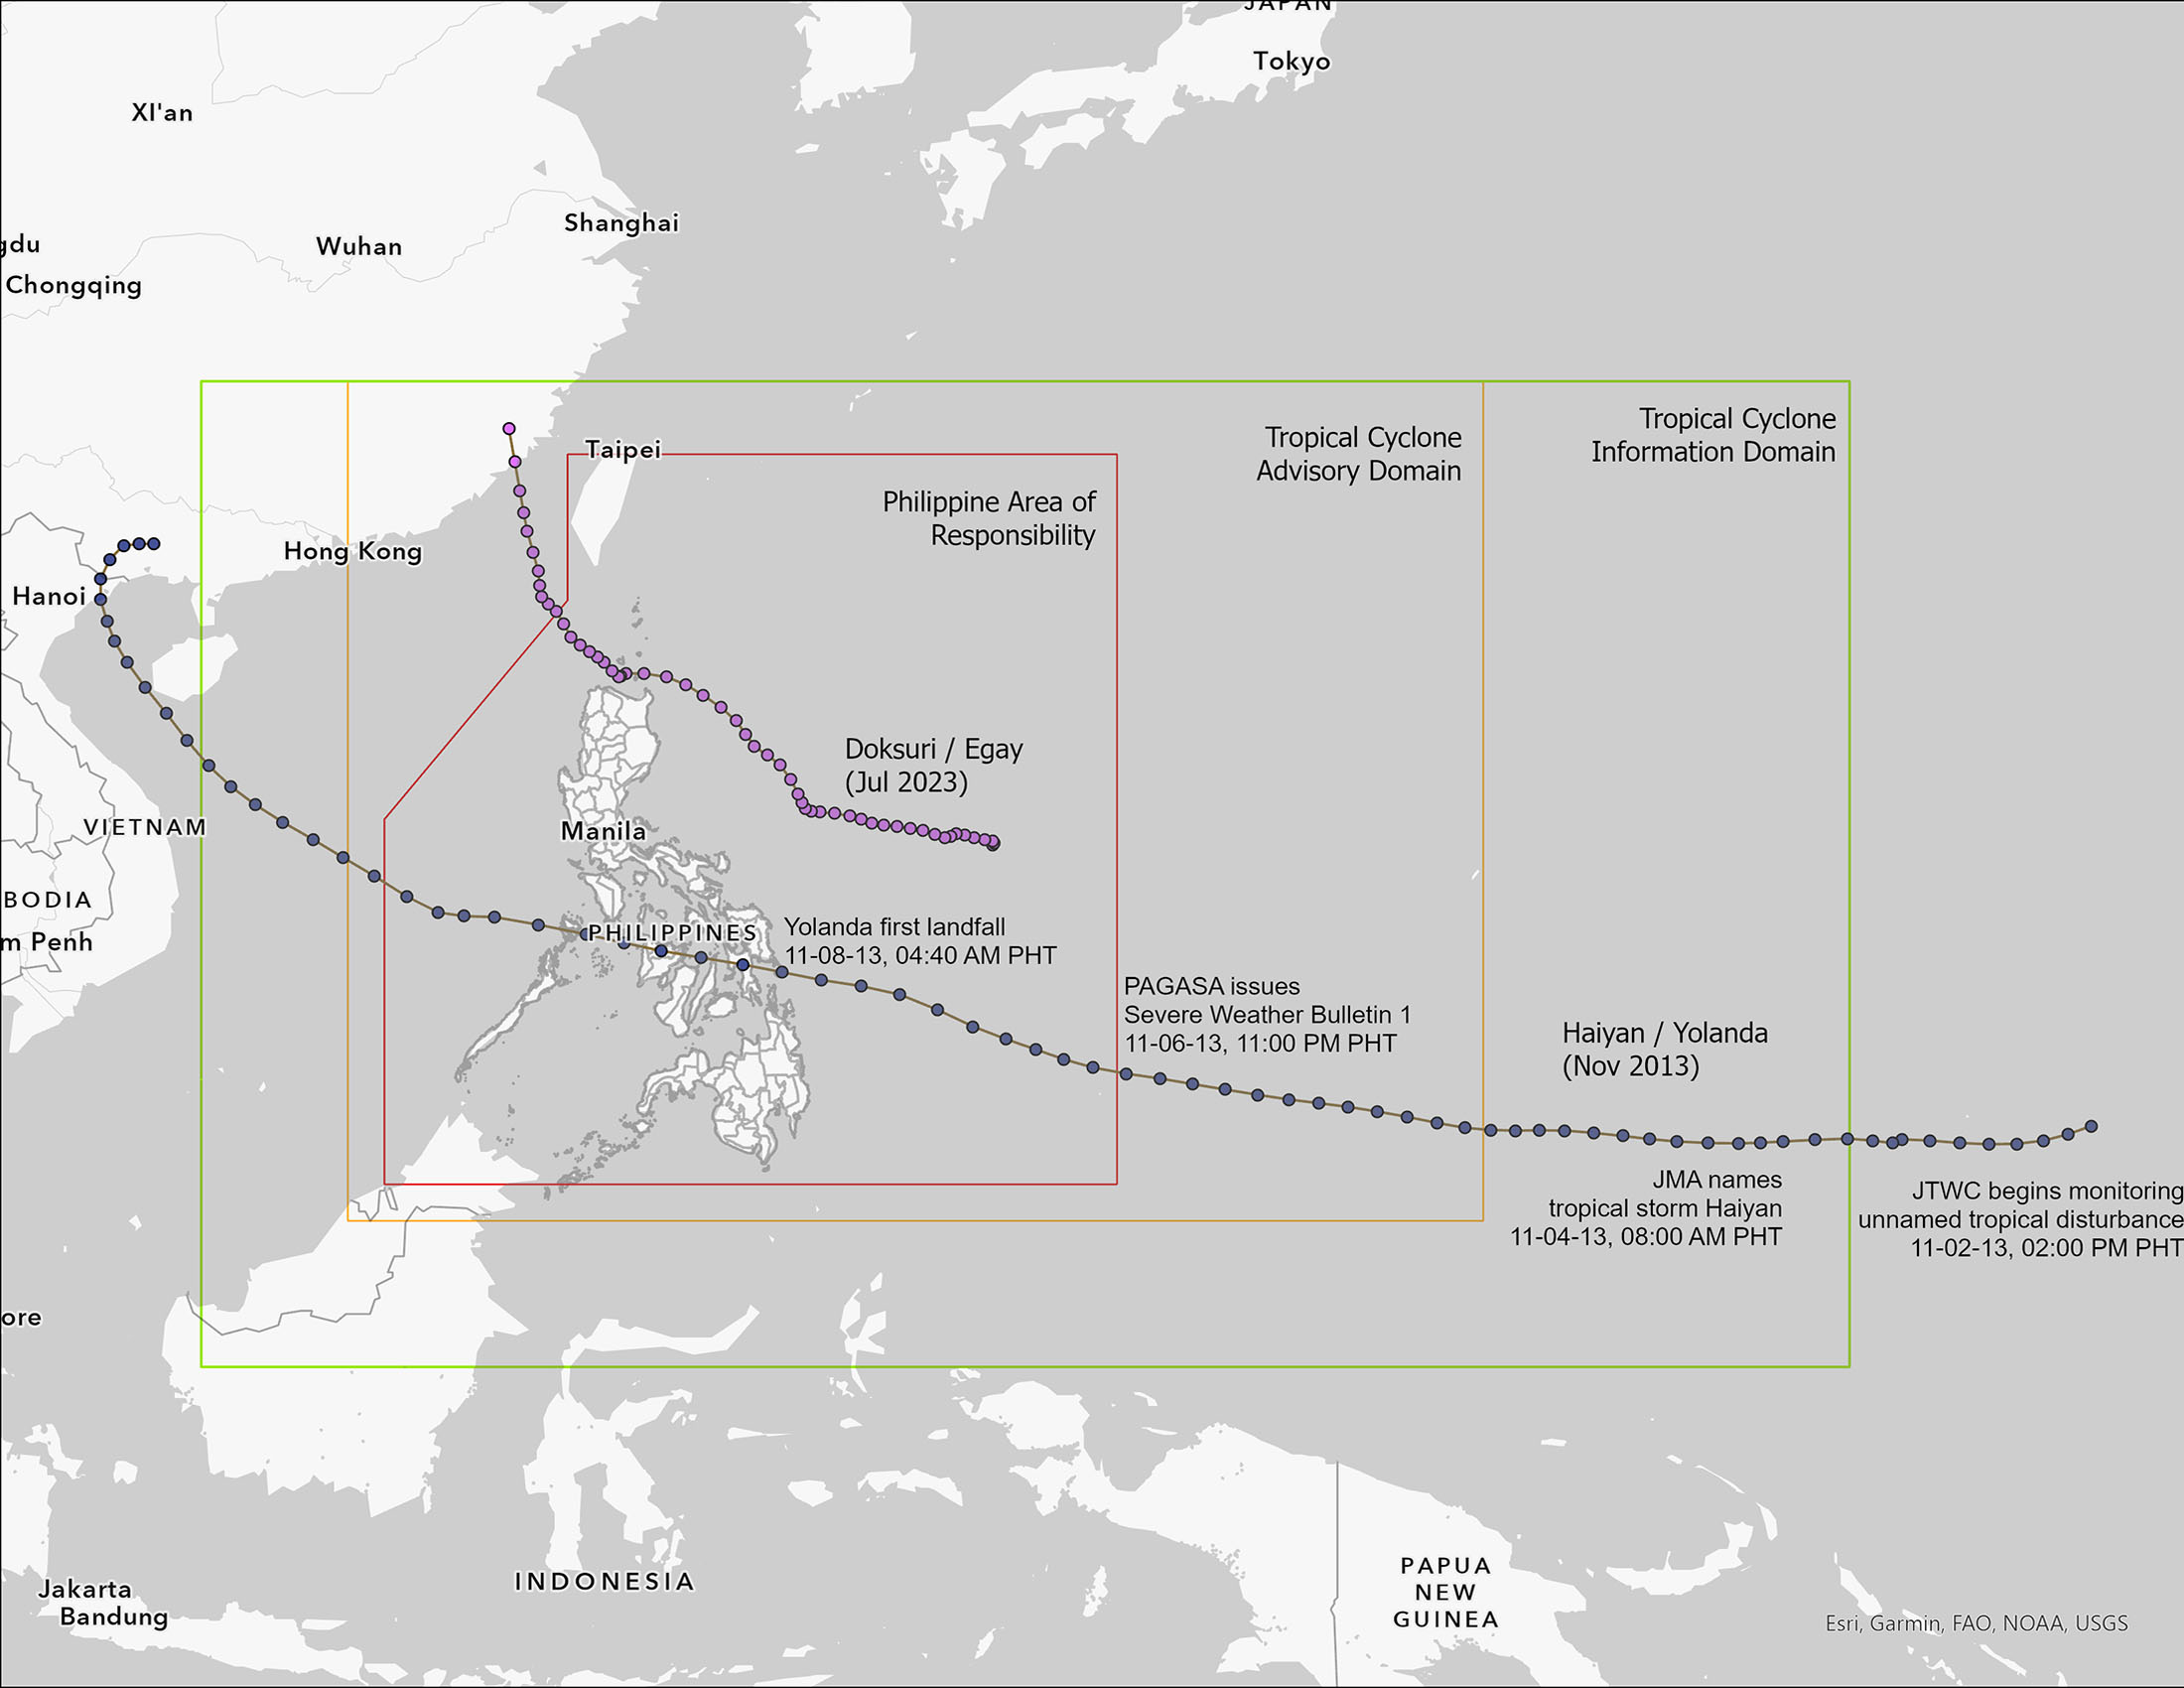 Meteorological history of Haiyan/Yolanda and PAGASA’s forecasting domains (Philippine Area of Responsibility, Tropical Cyclone Advisory Domain, Tropical Cyclone Information Domain); Doksuri/Egay also shown for context. Acronyms: JTWC- Joint Typhoon Warning Center, JMA- Japan Meteorological Agency, PAGASA- Philippine Atmospheric, Geophysical, and Astronomical Services Administration. PHT- Philippine Time. (Data source: NOAA IBTrACS)